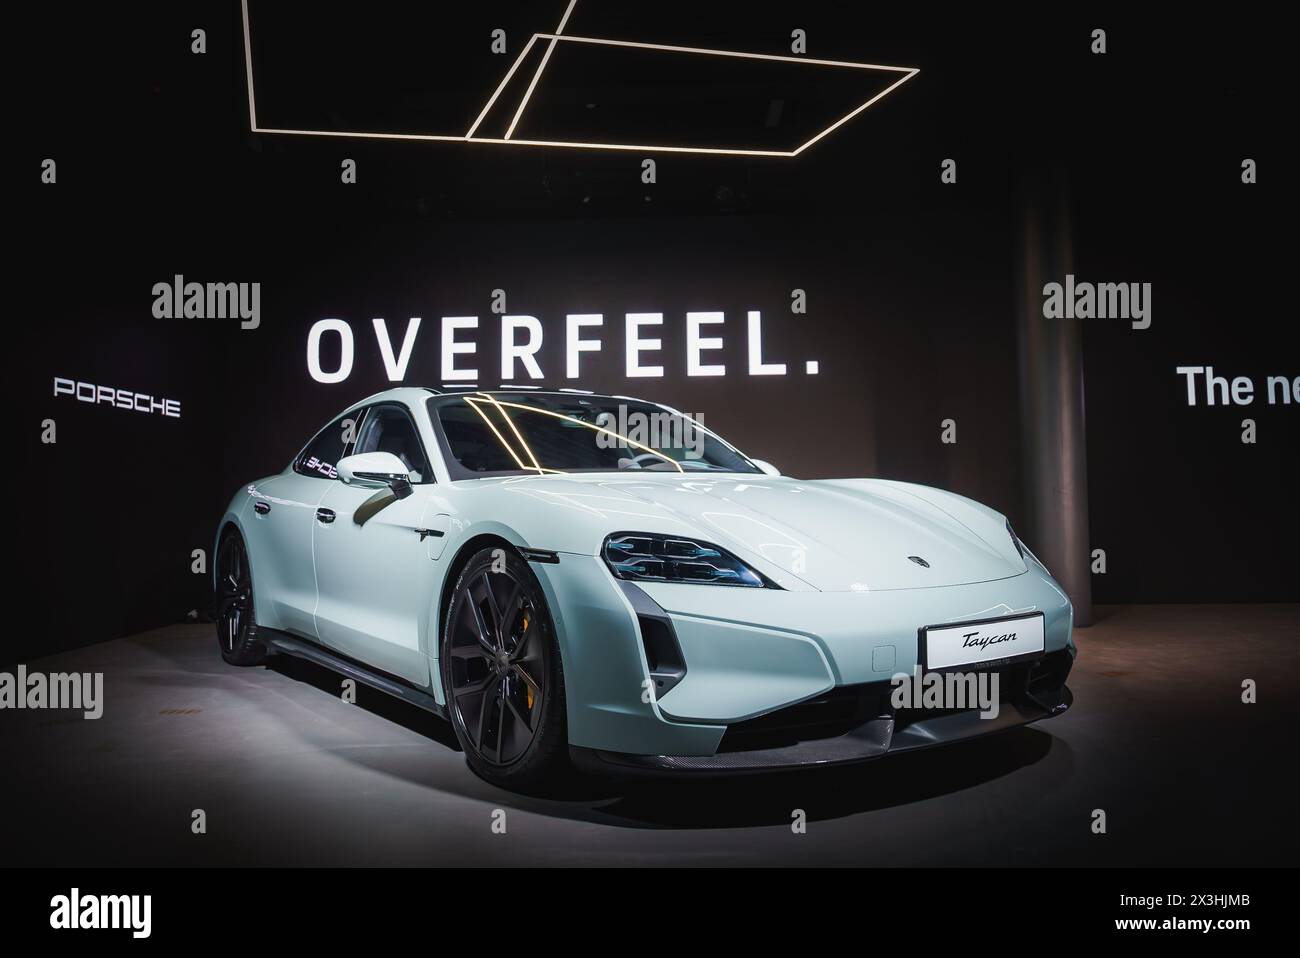 Light blue Porsche Taycan on display at auto show with OVERFEEL slogan in darkened room. Stock Photo